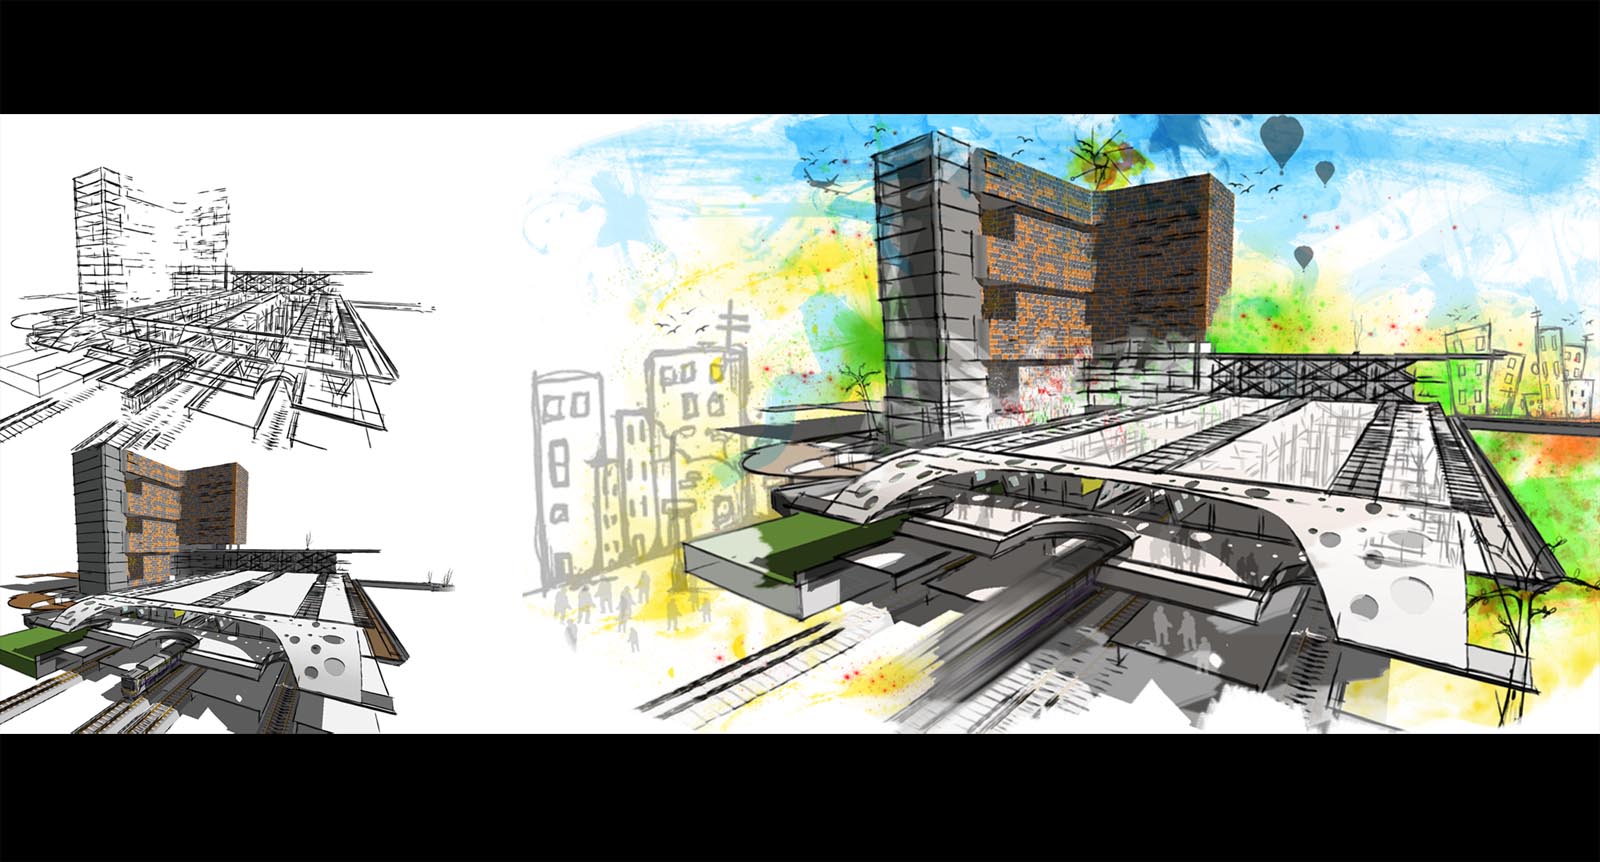 Railway station with commercial complex-thesis project